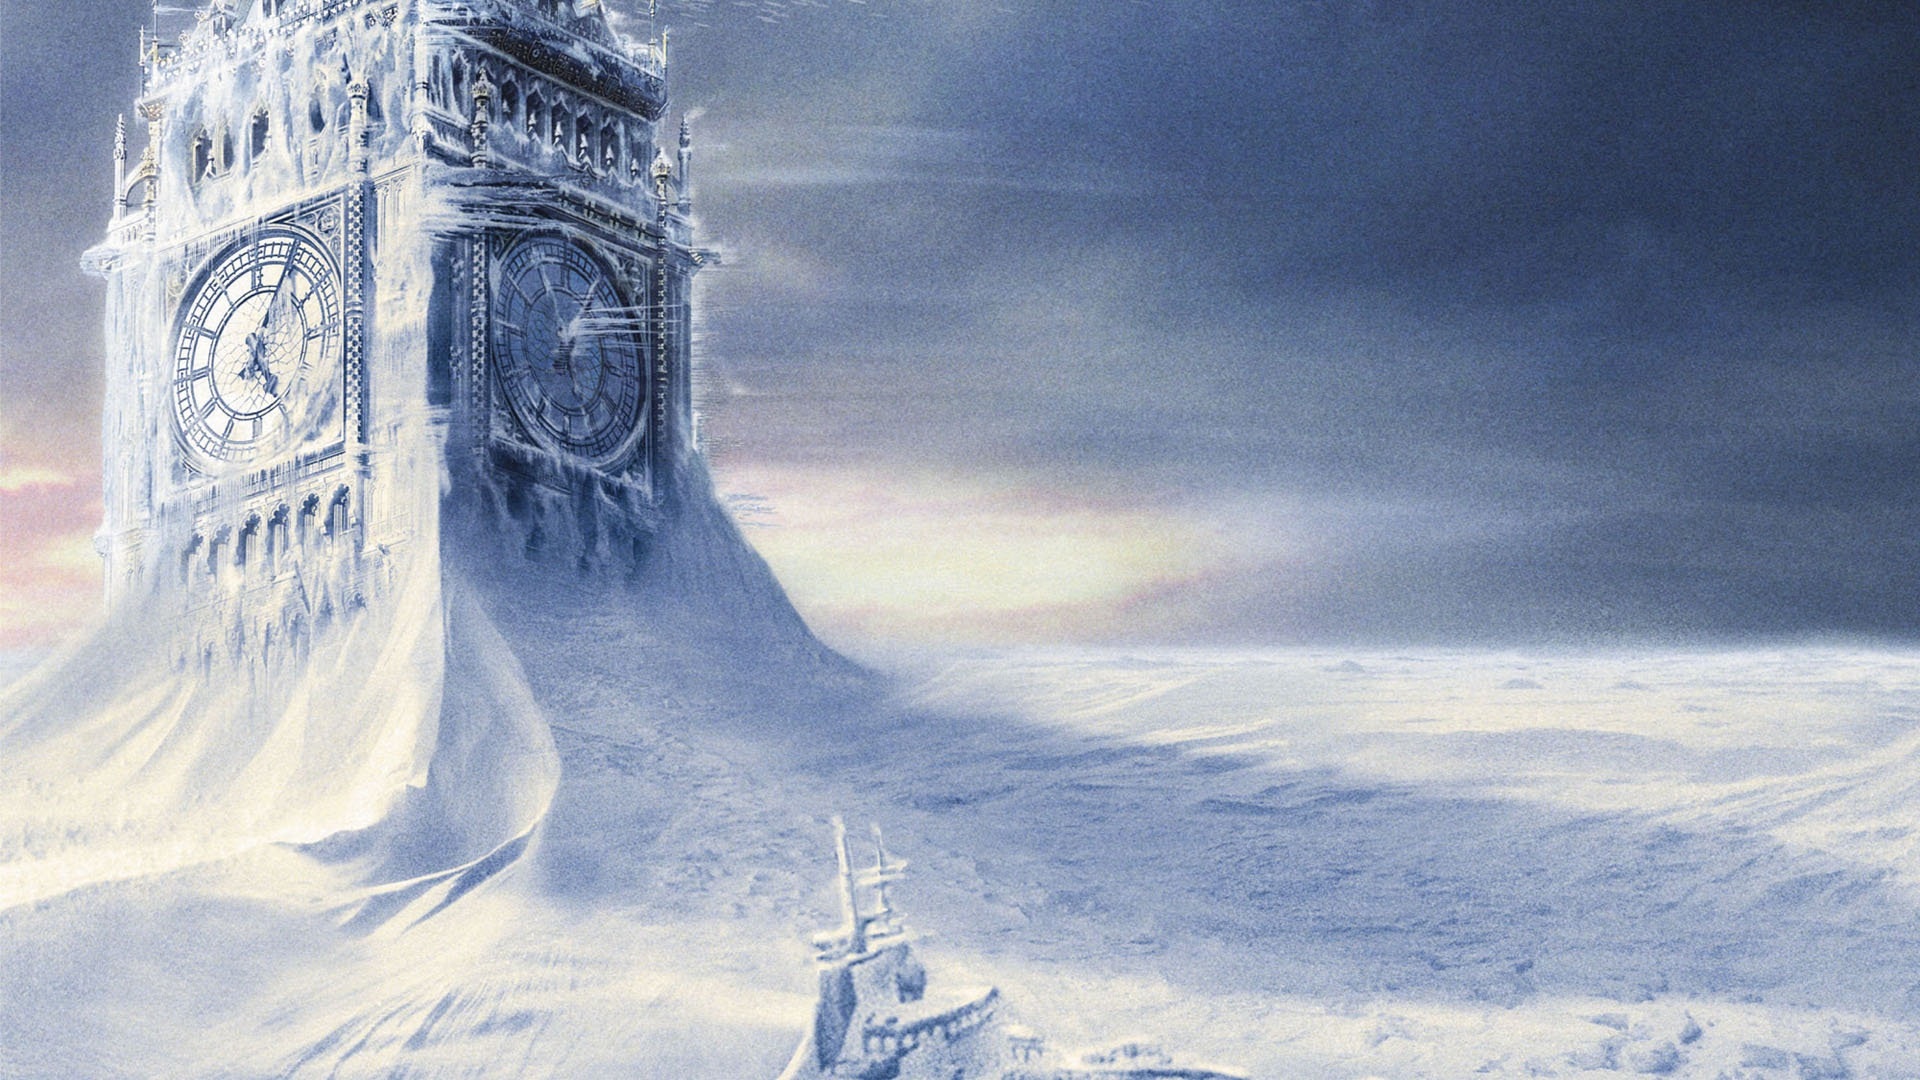 The Day After Tomorrow Blu-ray Steelbook is coming soon in UK